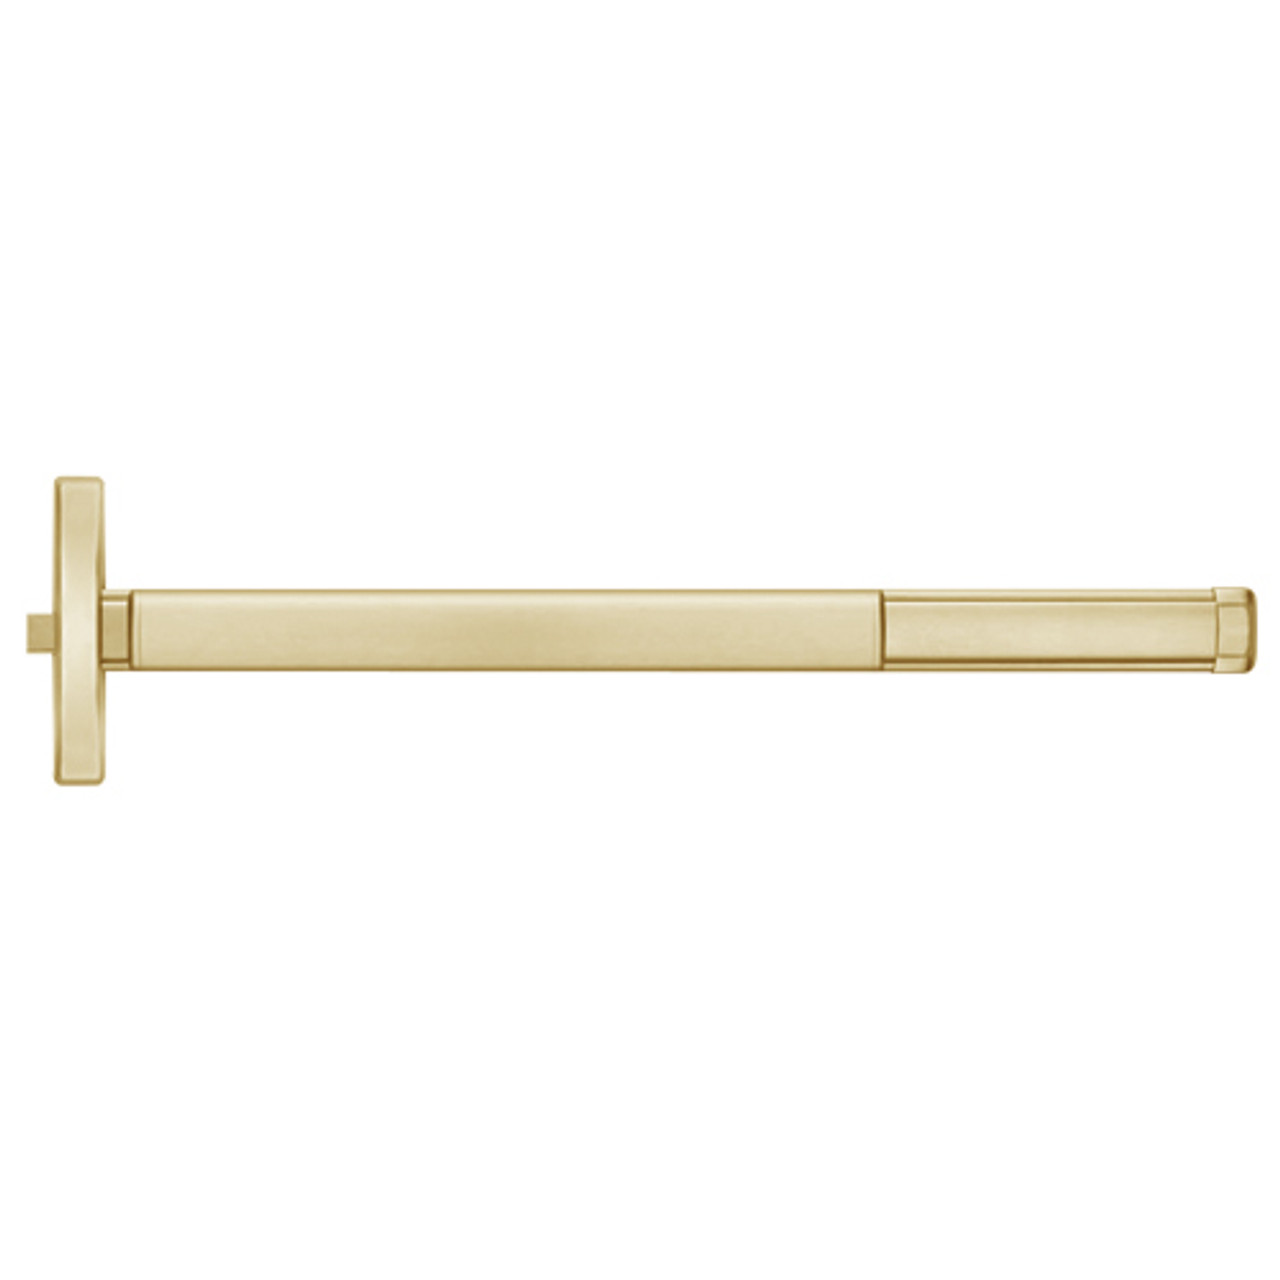 ELRFL2401-606-48 PHI 2400 Series Fire Rated Apex Rim Exit Device with Electric Latch Retraction Prepped for Cover Plate in Satin Brass Finish